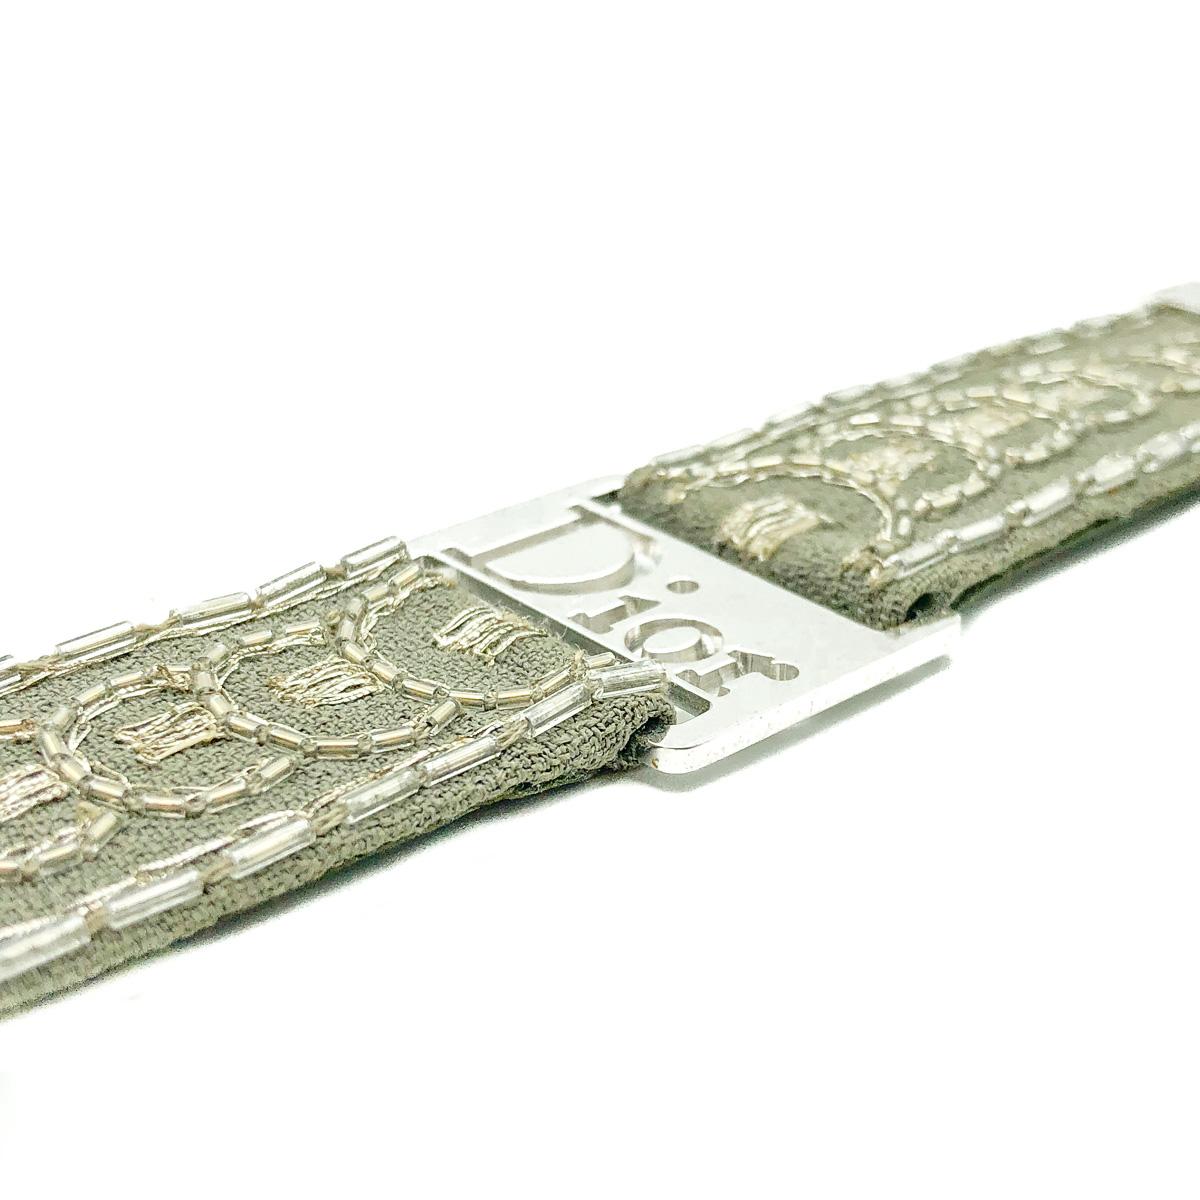 An ultra cool statement with this Vintage Dior Khaki Strap Bracelet.
Featuring an embroidered khaki grey fabric strap set with wonderfully high quality rhodium plated hardware. Rhodium plated end and the large Dior logo plaque set the pulse racing.